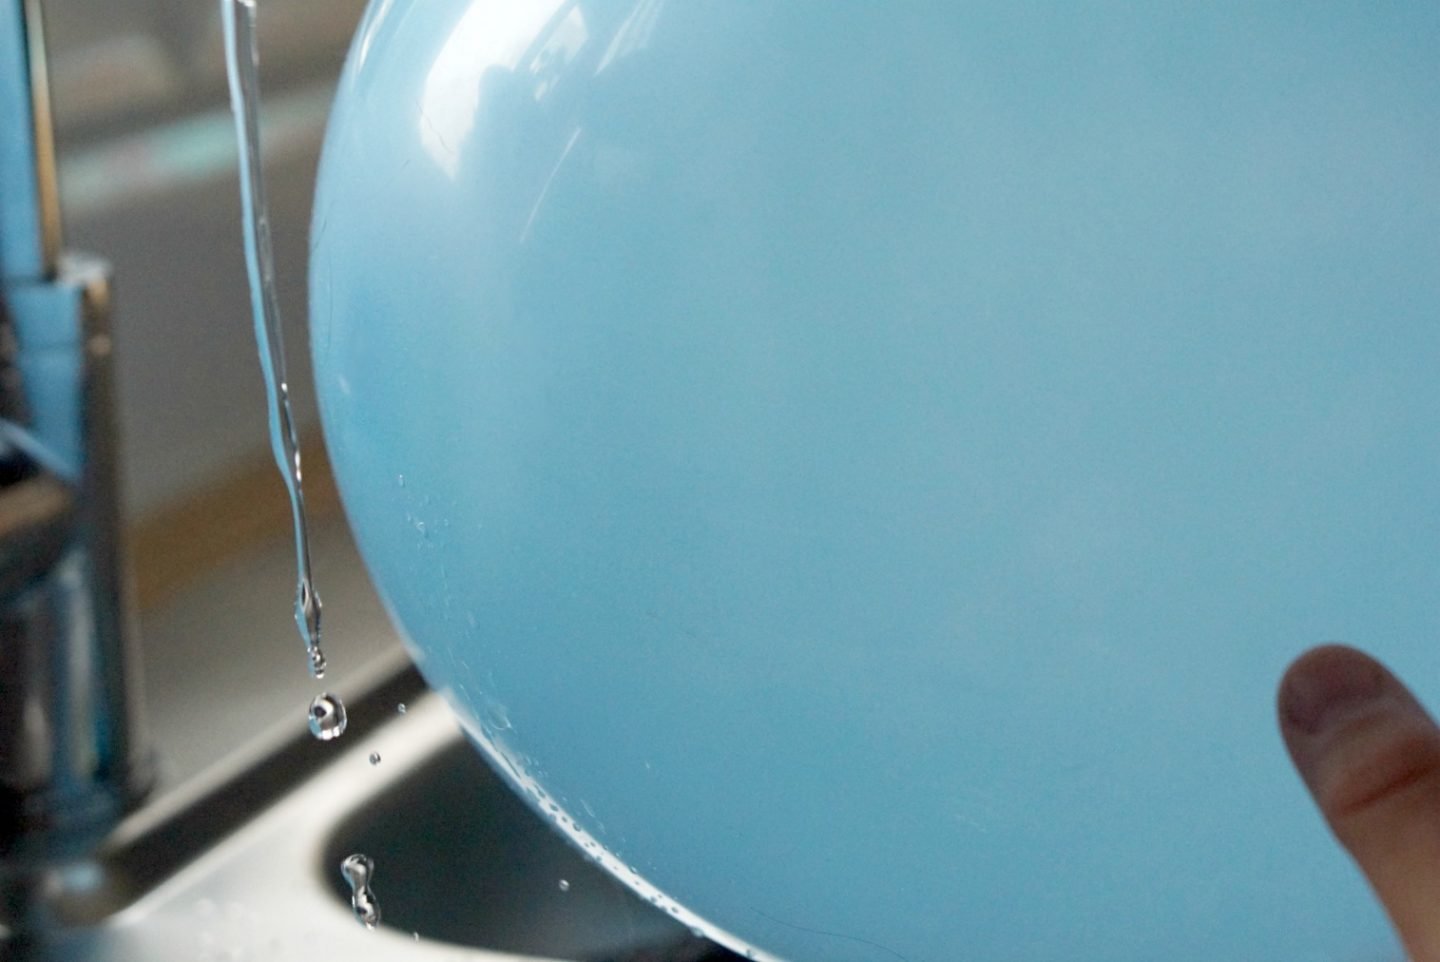 A cool but easy science experiment, how to make bendy water with Terrific Scientific 6